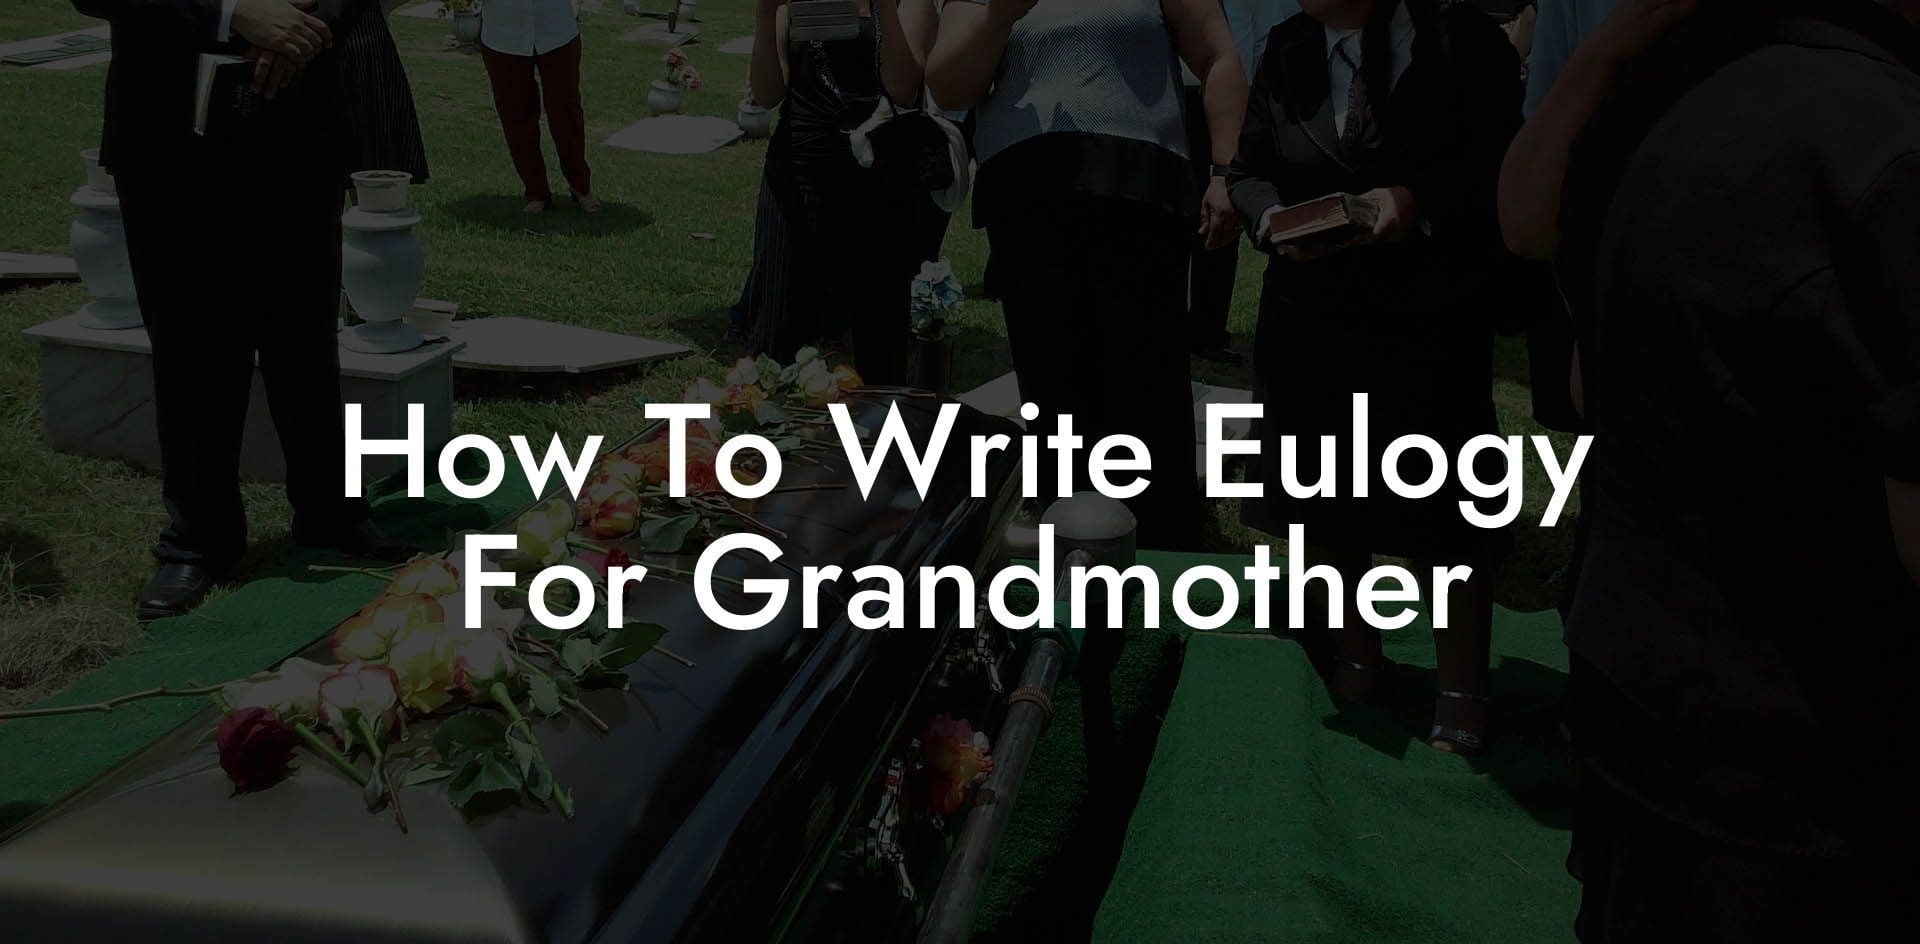 How To Write Eulogy For Grandmother